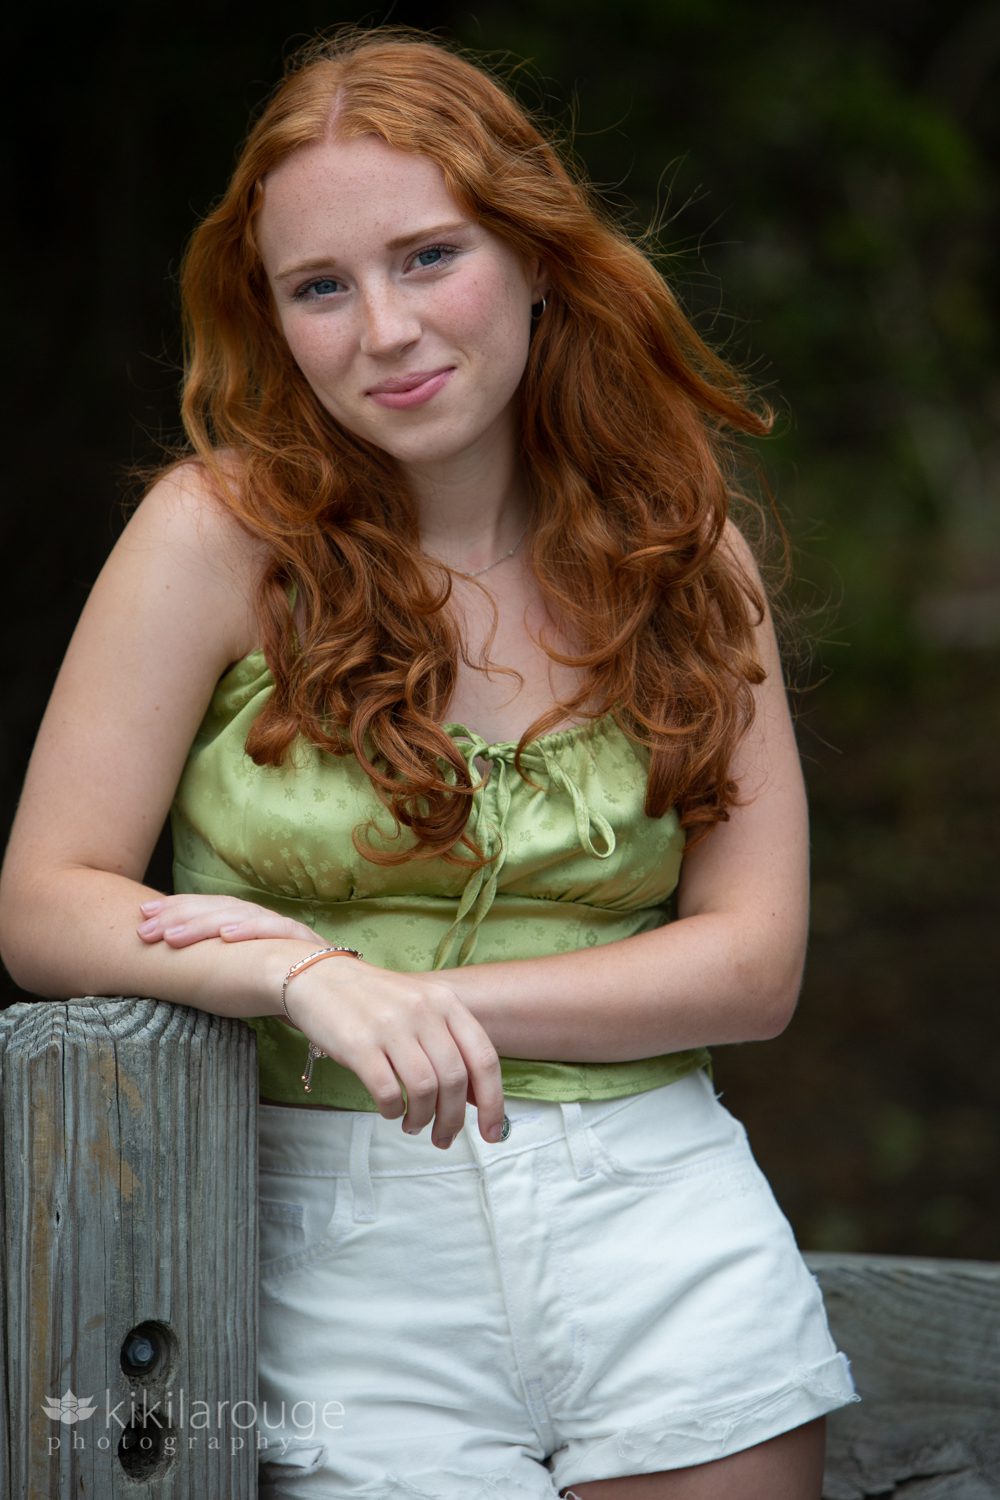 Redheaded teen senior portrait Sandy Point with hair blowing in green tanks top and white shorts